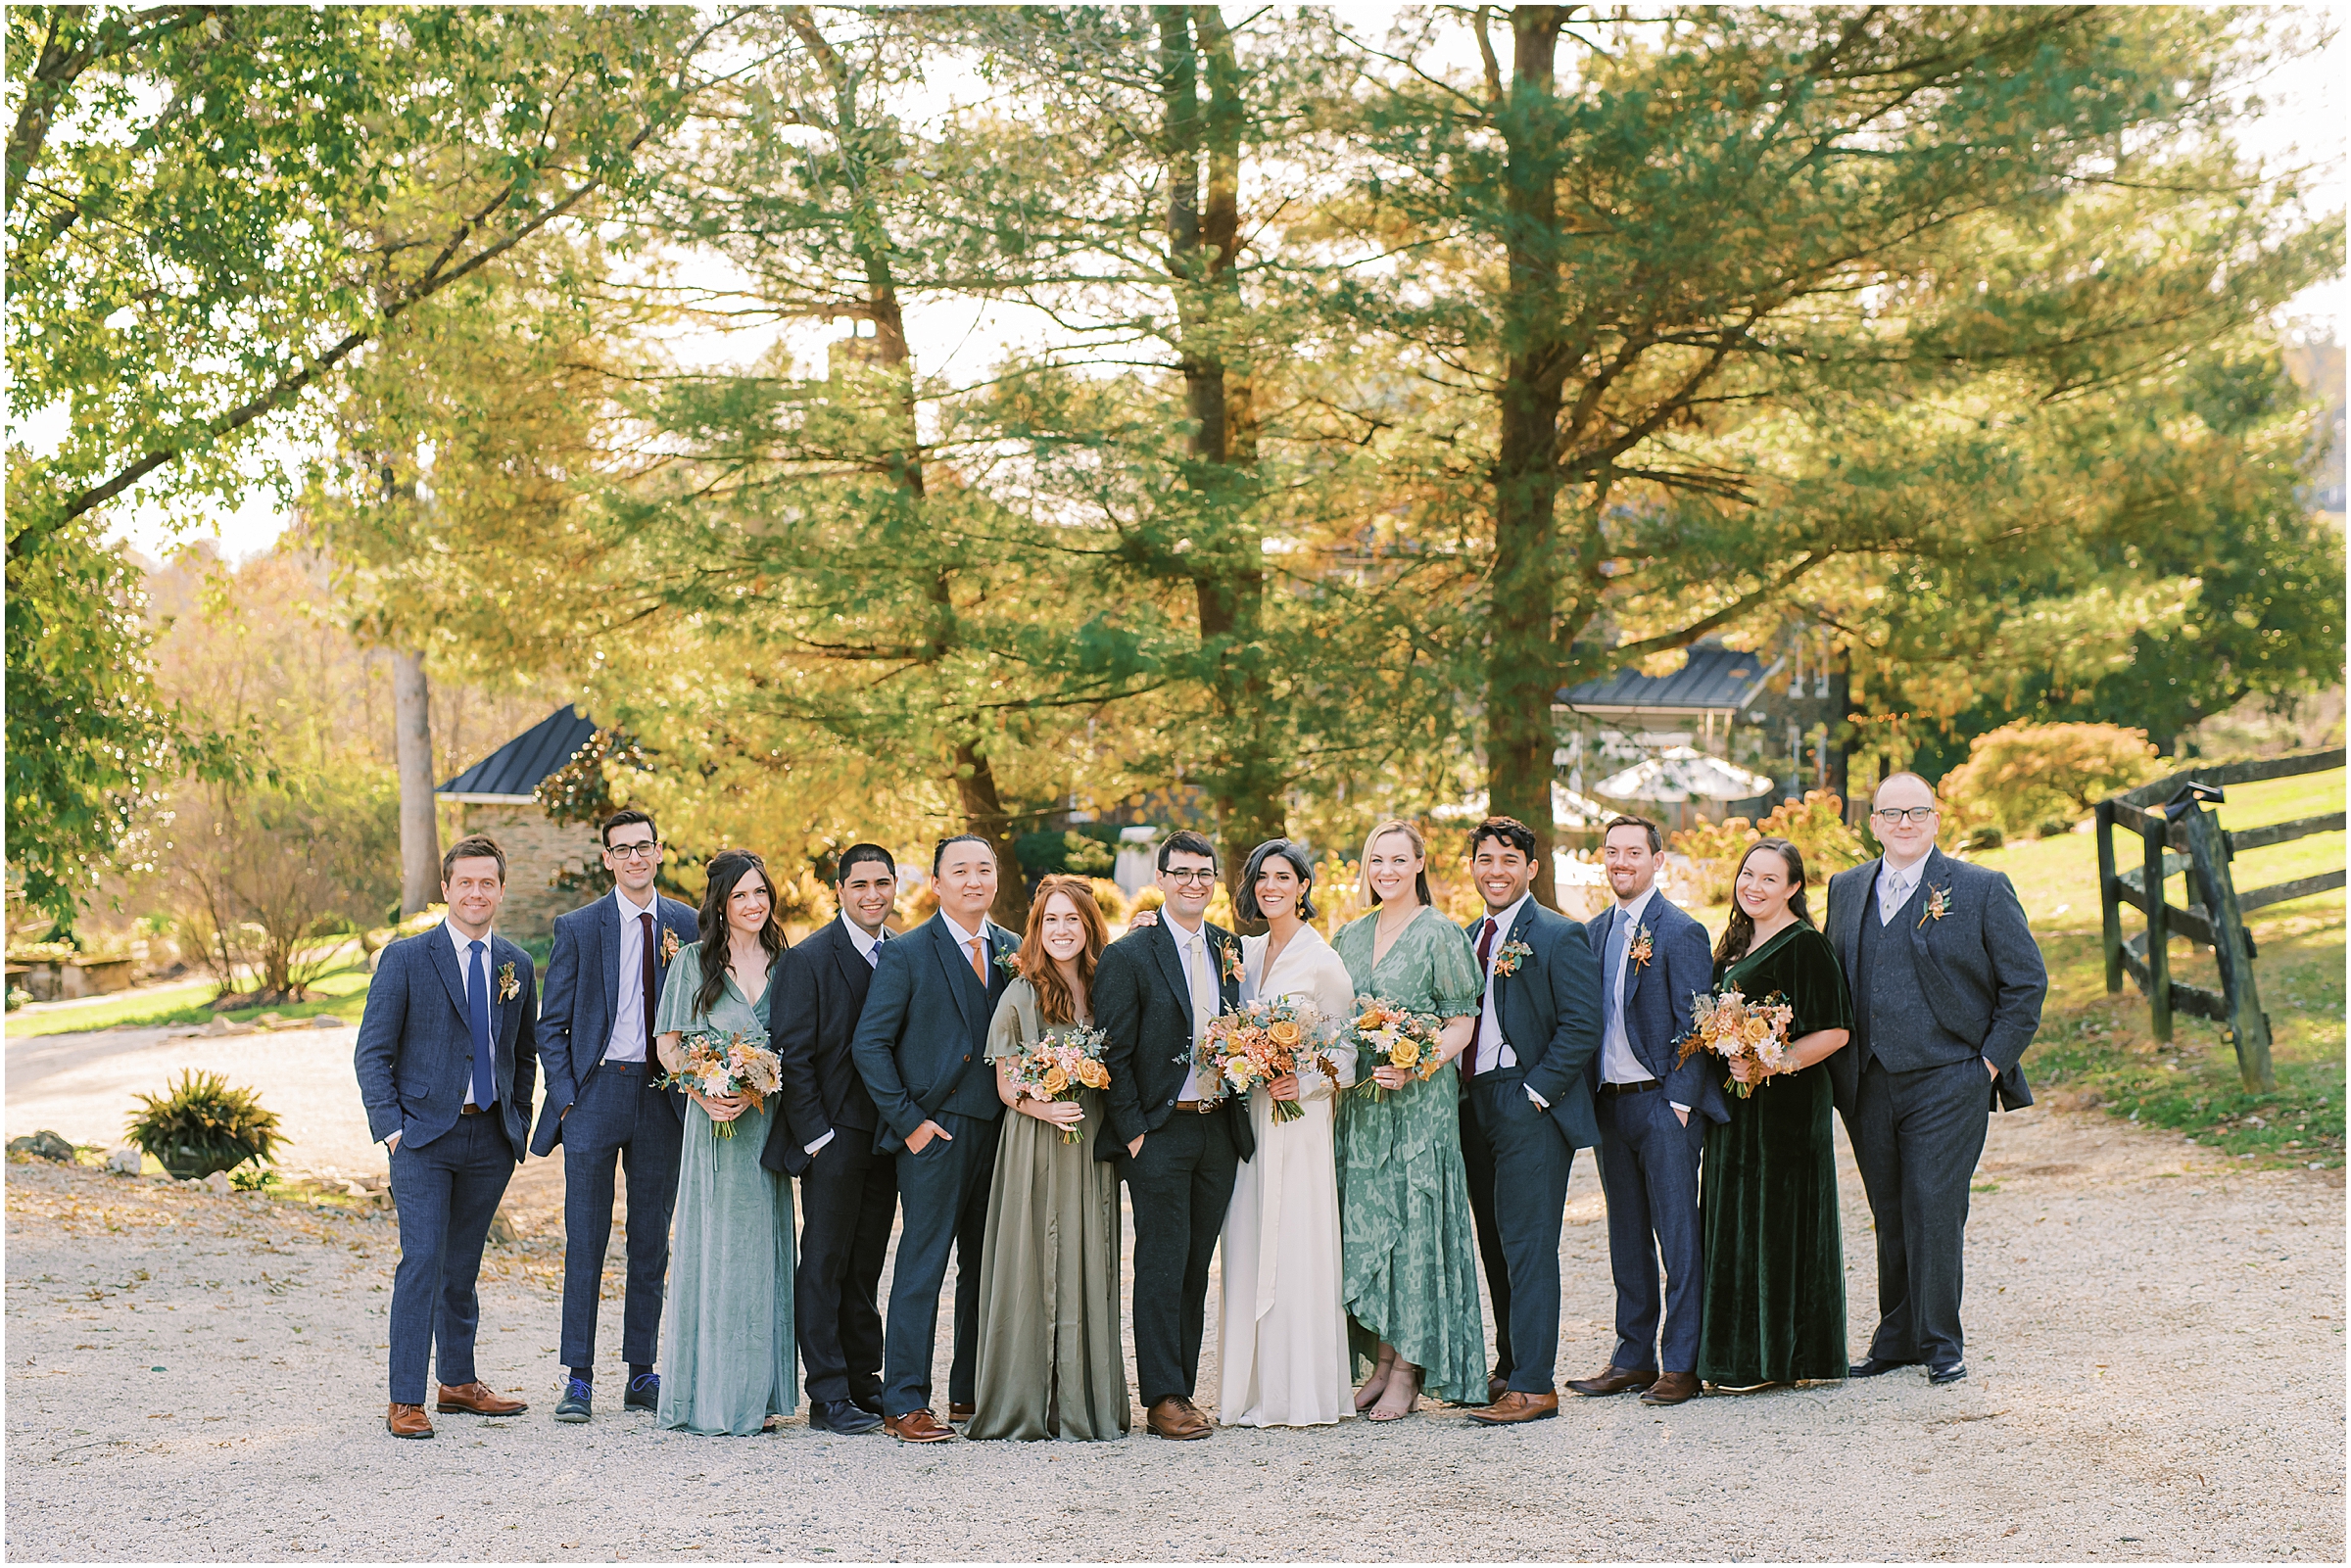 Wedding party portrait for winter market themed wedding at Tranquility Farm